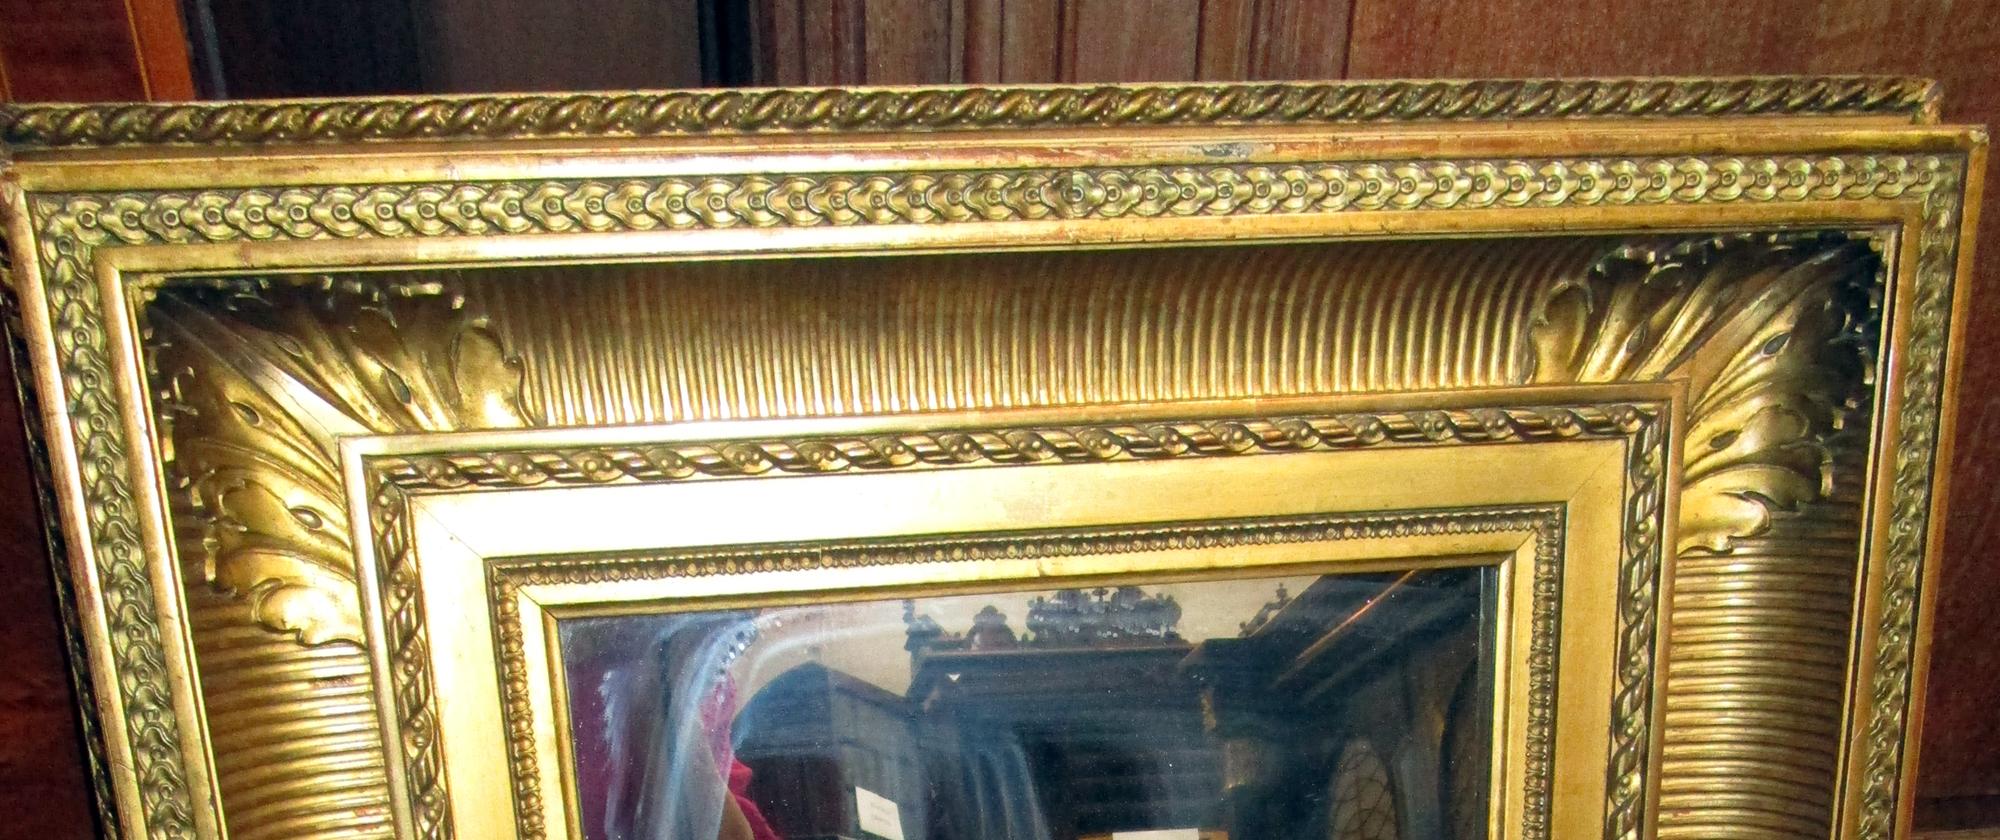 Elaborate gold gilt wooden picture frame converted into mirror. Made by renowned London gilder Charles H. West. His frames hang in the Tate and National Portrait Museum as well as other important museums throughout the world. Very detailed featuring